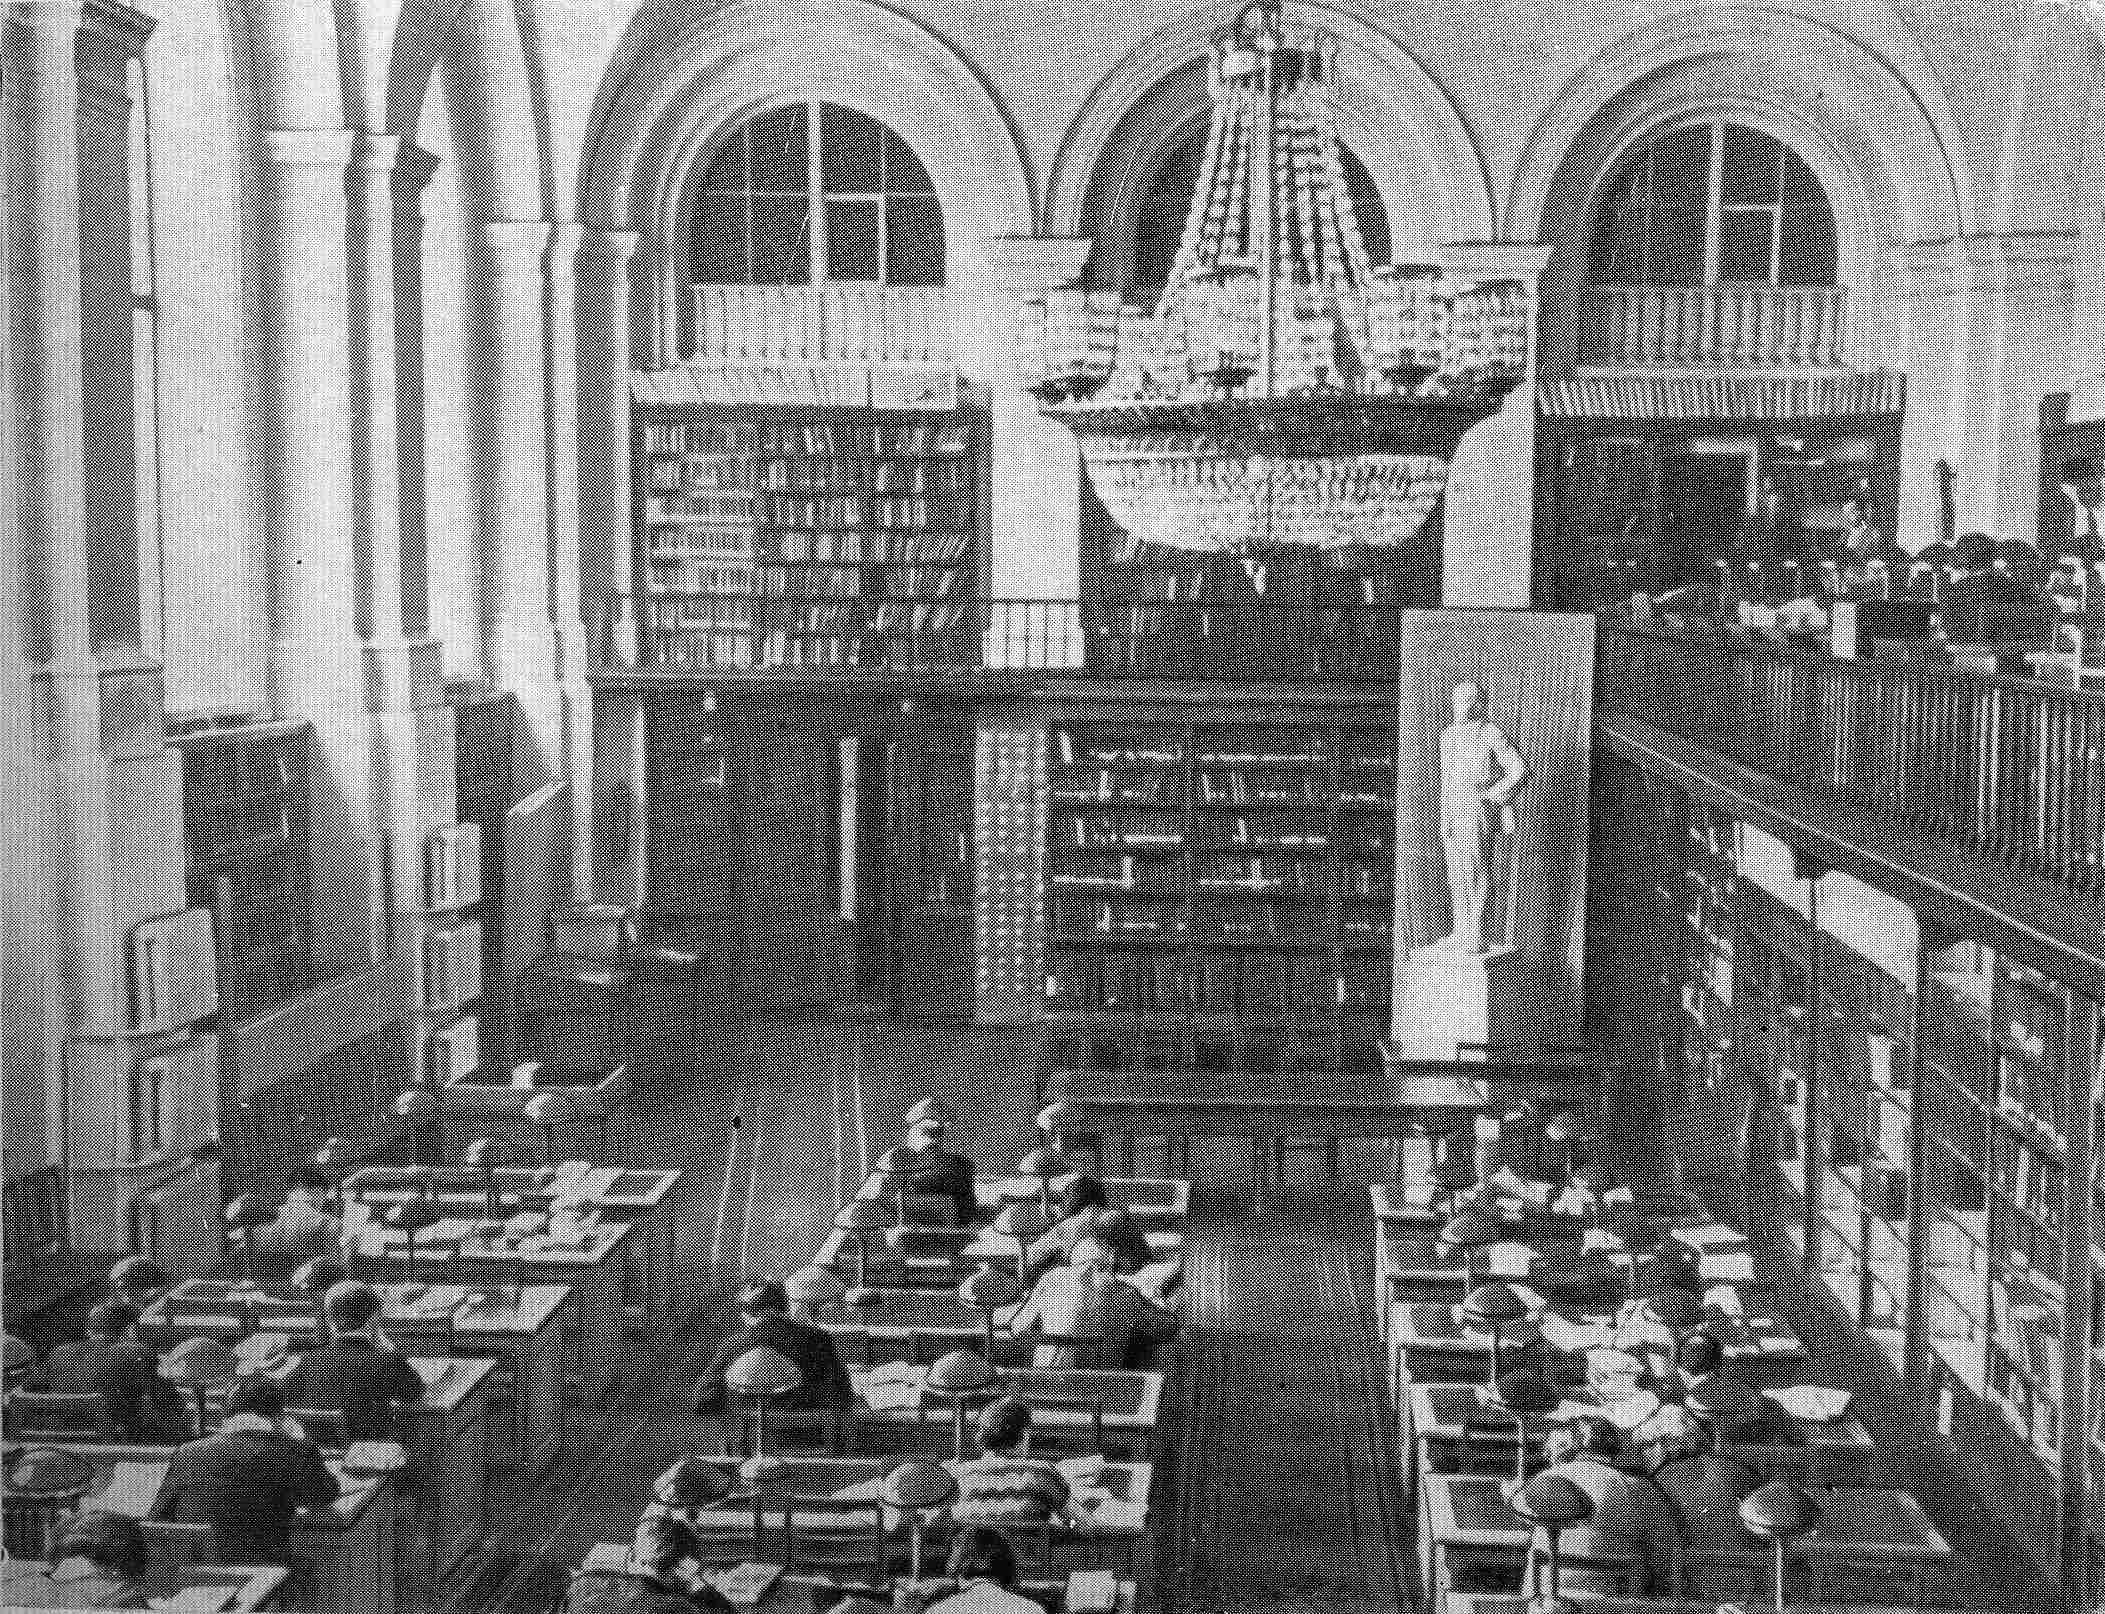 On April 22, 1960, the reading room was dedicated to V. Lenin